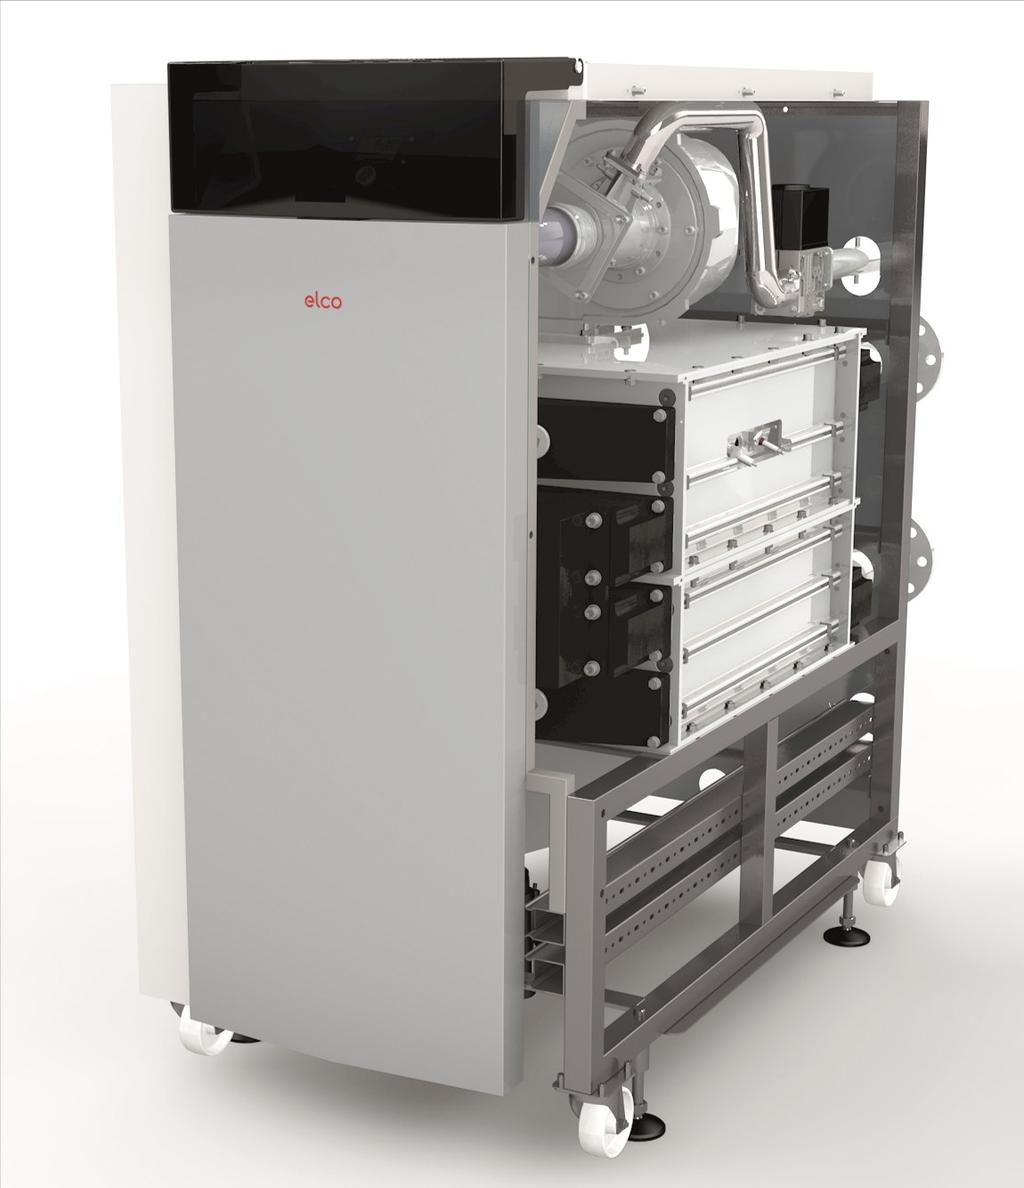 Gas condensing boiler R600 Models and output Application possibilities Value propositions Technical description Models and output The floor standing gas condensing boiler R600 is available in 7 types